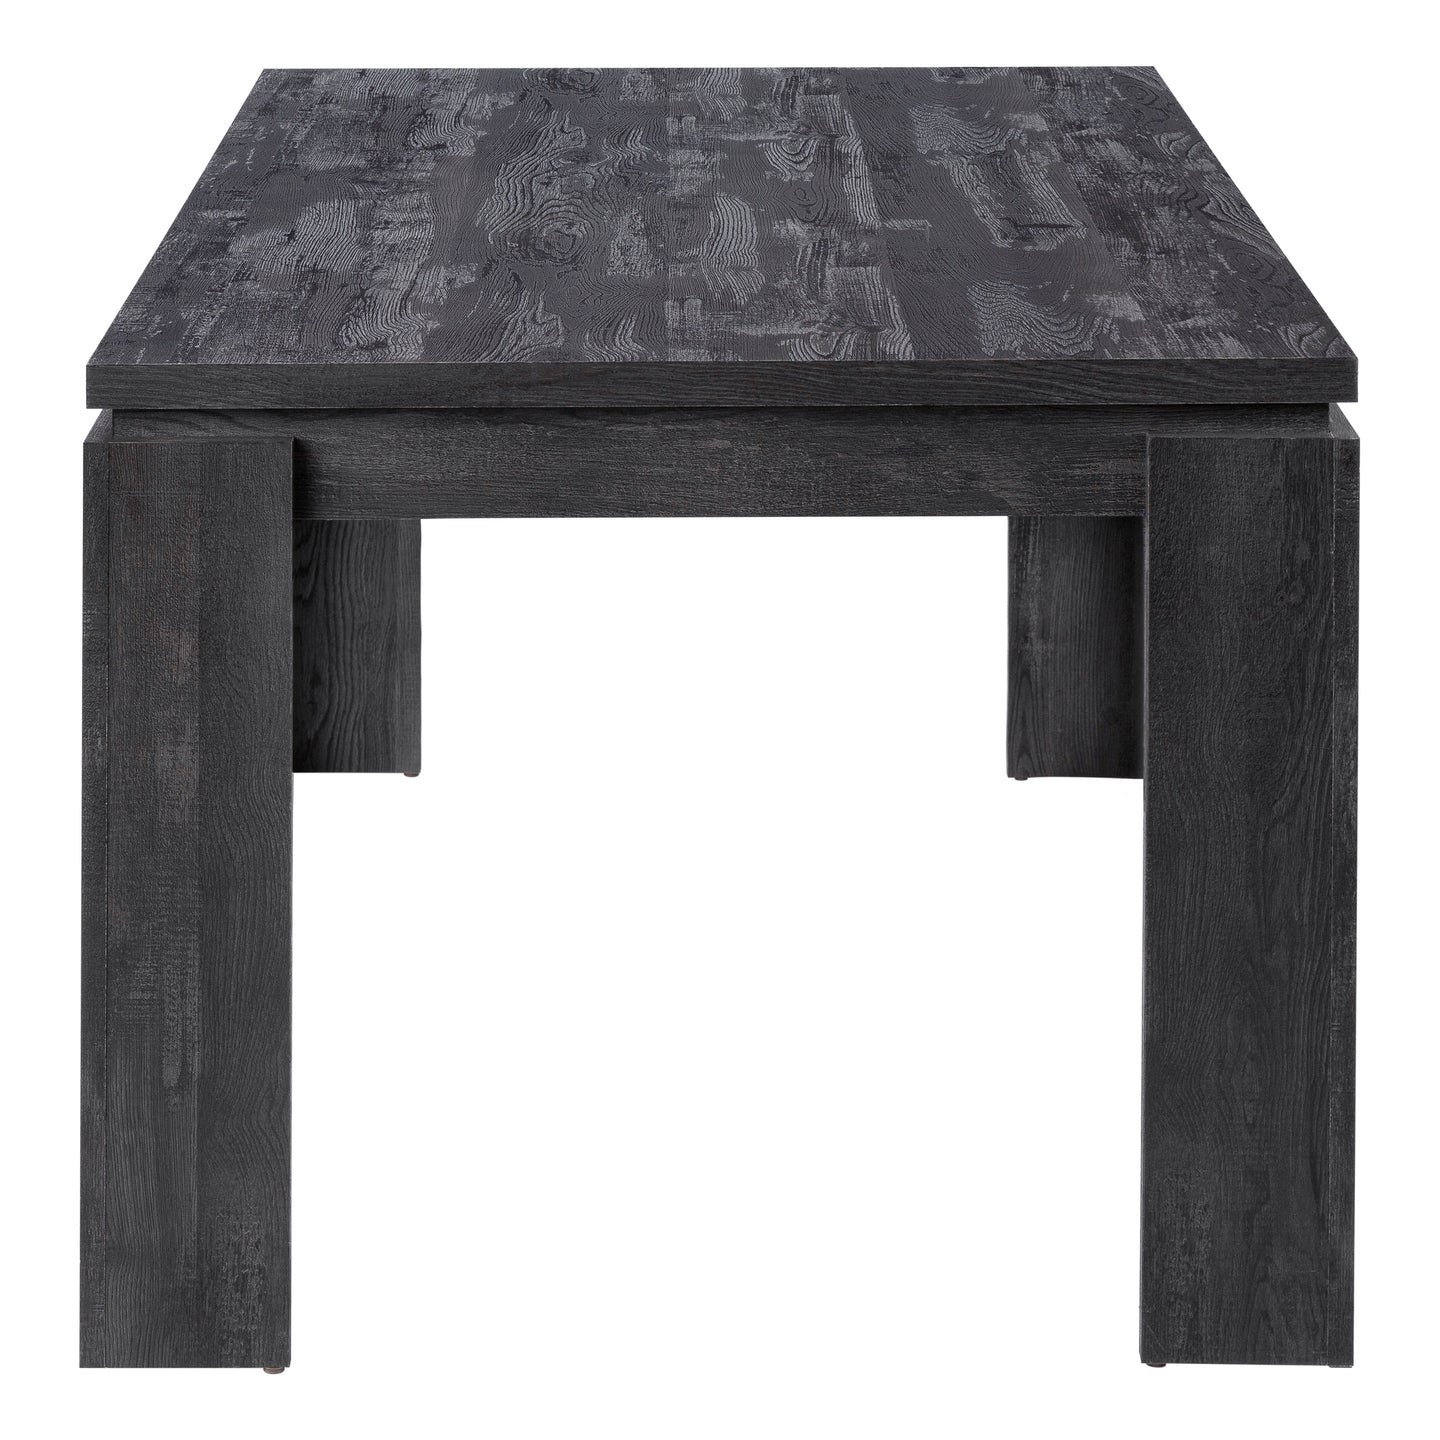 I 1089 Dining Table - 36"X 60" / Black Reclaimed Wood-Look - Furniture Depot (7881065267448)